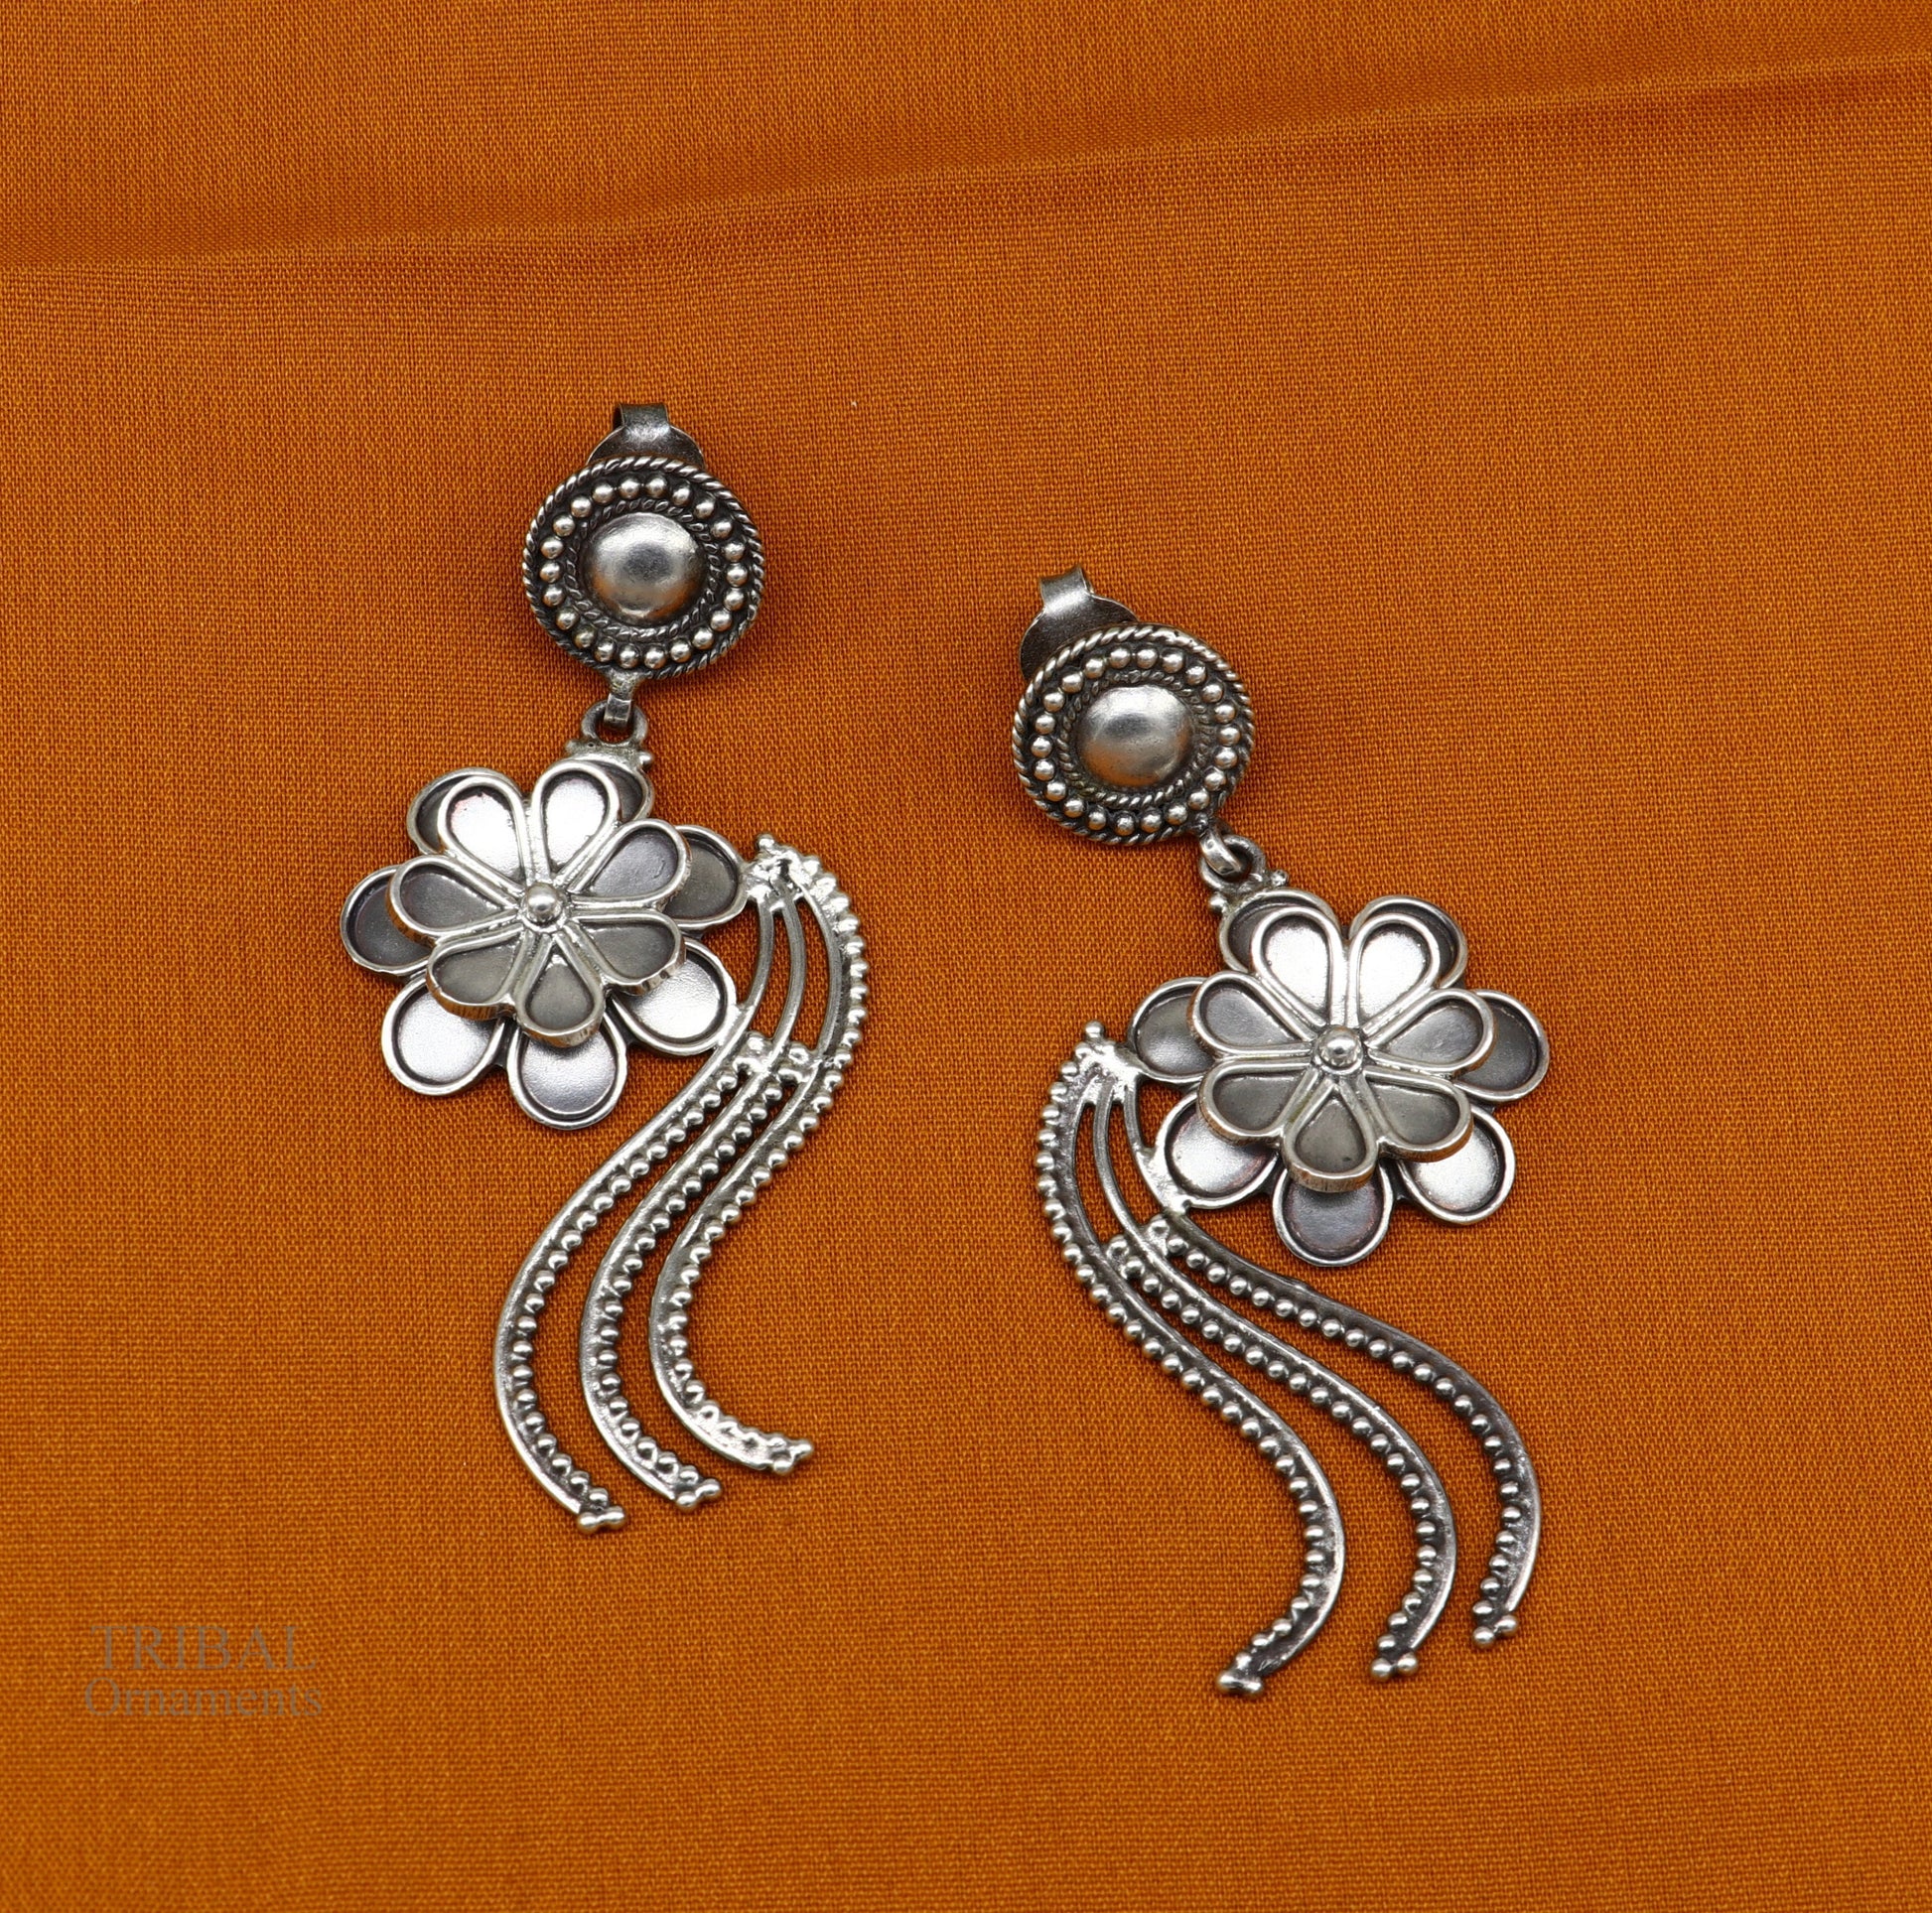 925 sterling silver handmade unique fancy design floral stud earring attractive gifting jewelry, tribal earring drop dangle ear1108 - TRIBAL ORNAMENTS